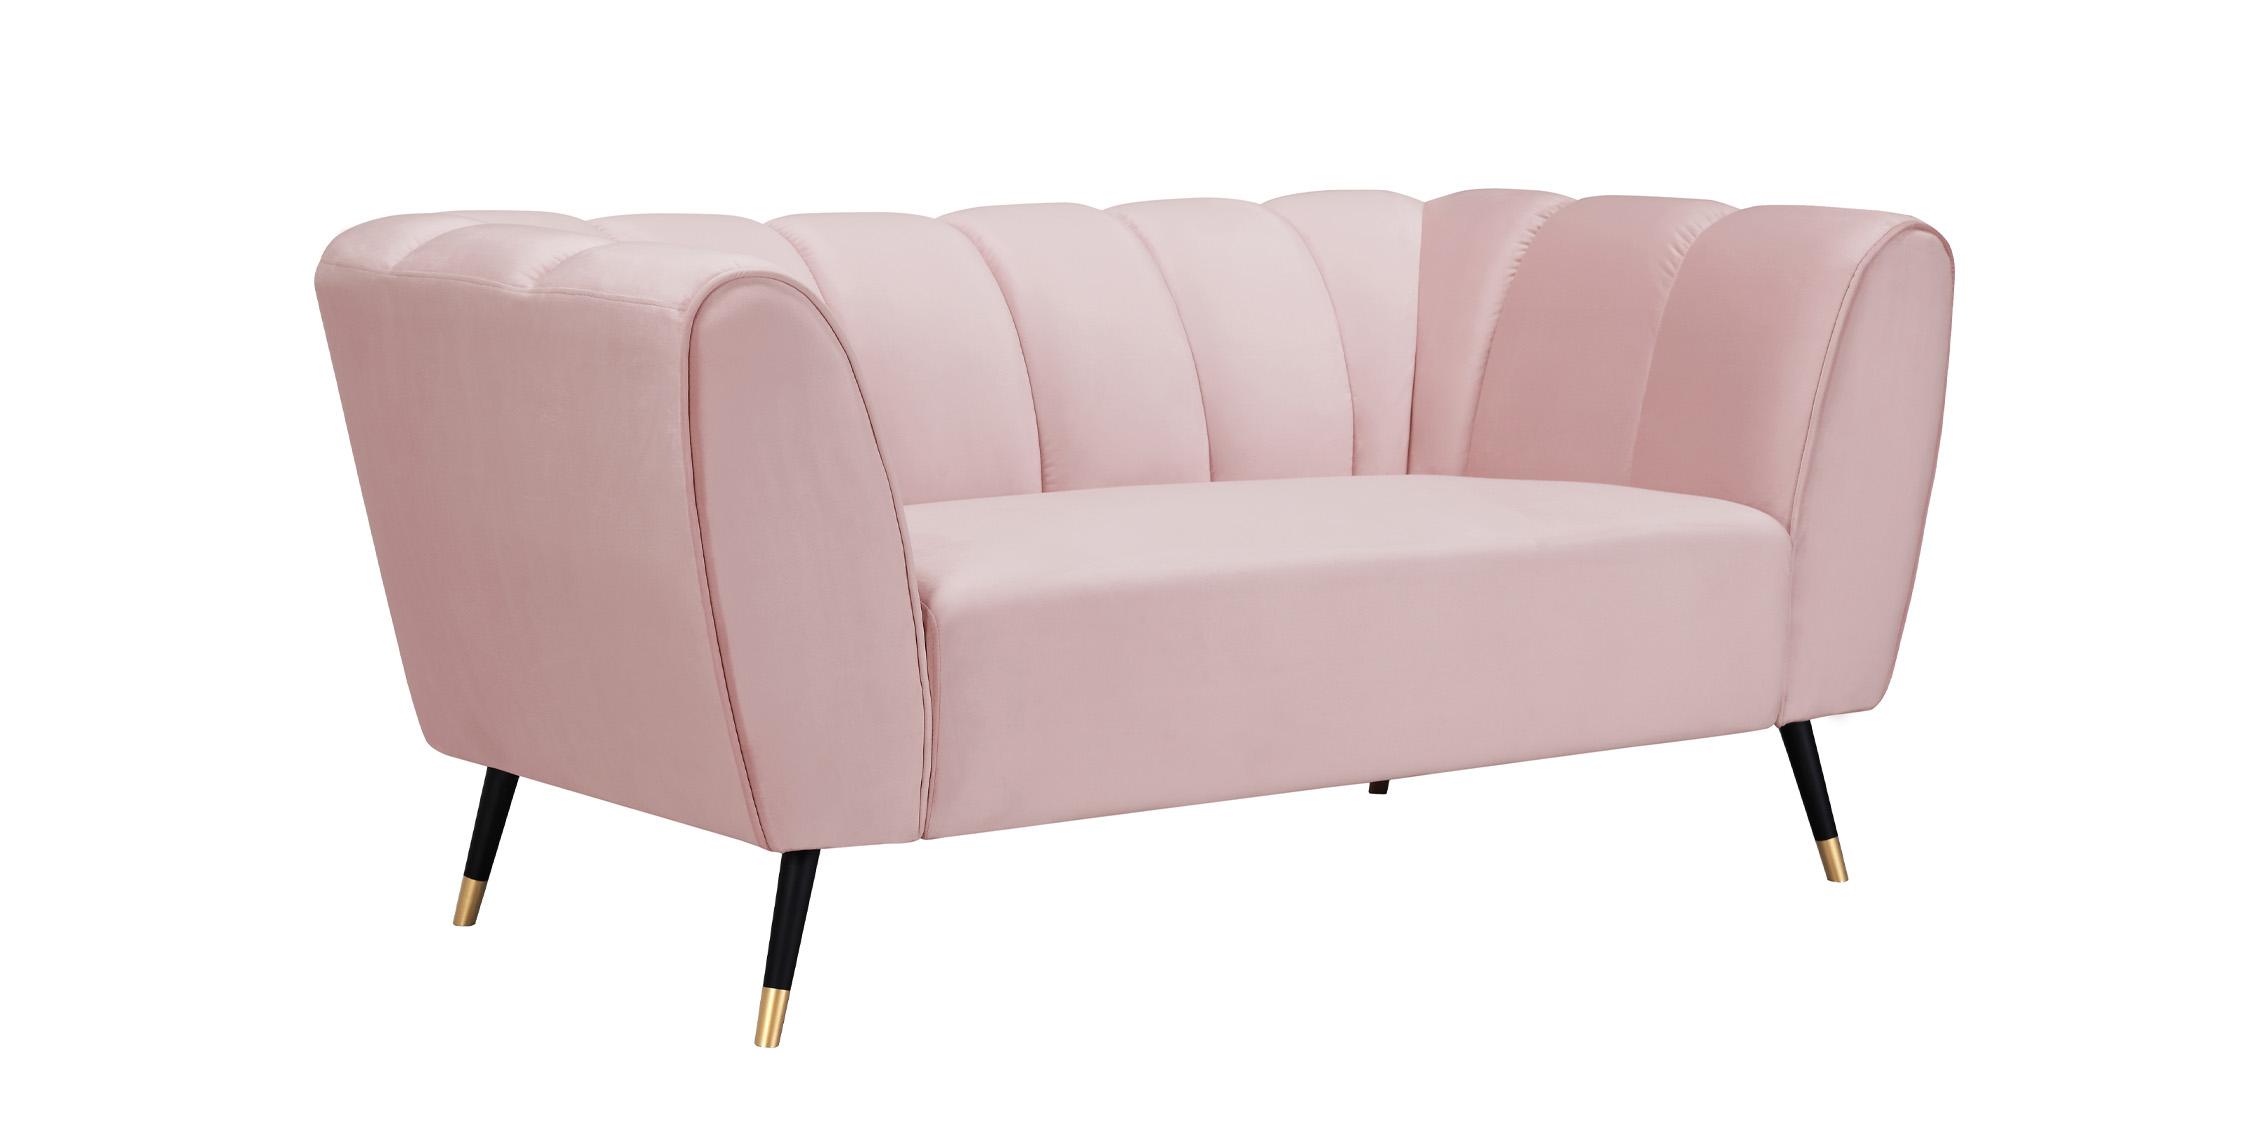 Contemporary, Modern Loveseat BEAUMONT 626Pink-L 626Pink-L in Pink Velvet